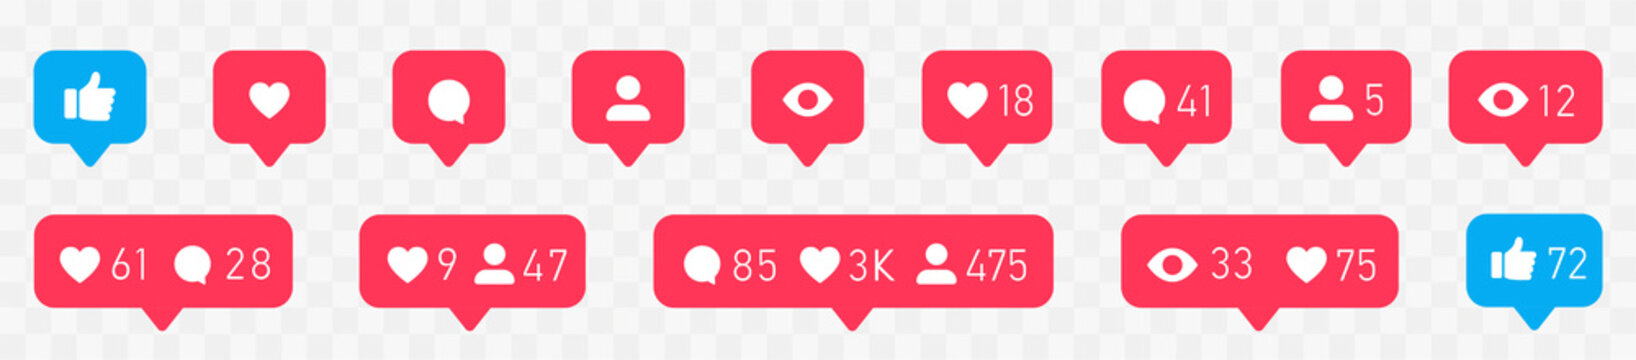 Like social network icons. Like, thumb up and heart collection. Buton for social media. Follower notification symbol.